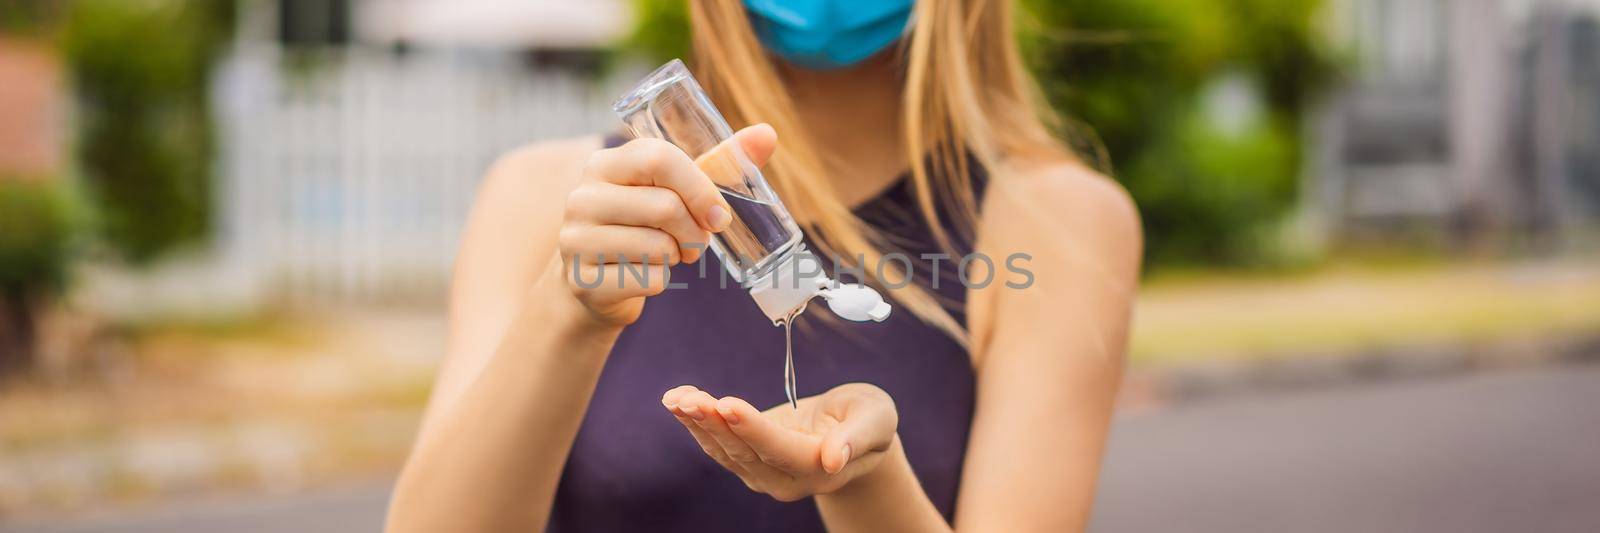 Woman in a small town in a medical mask uses a sanitizer because of a coronovirus epidemic BANNER, LONG FORMAT by galitskaya